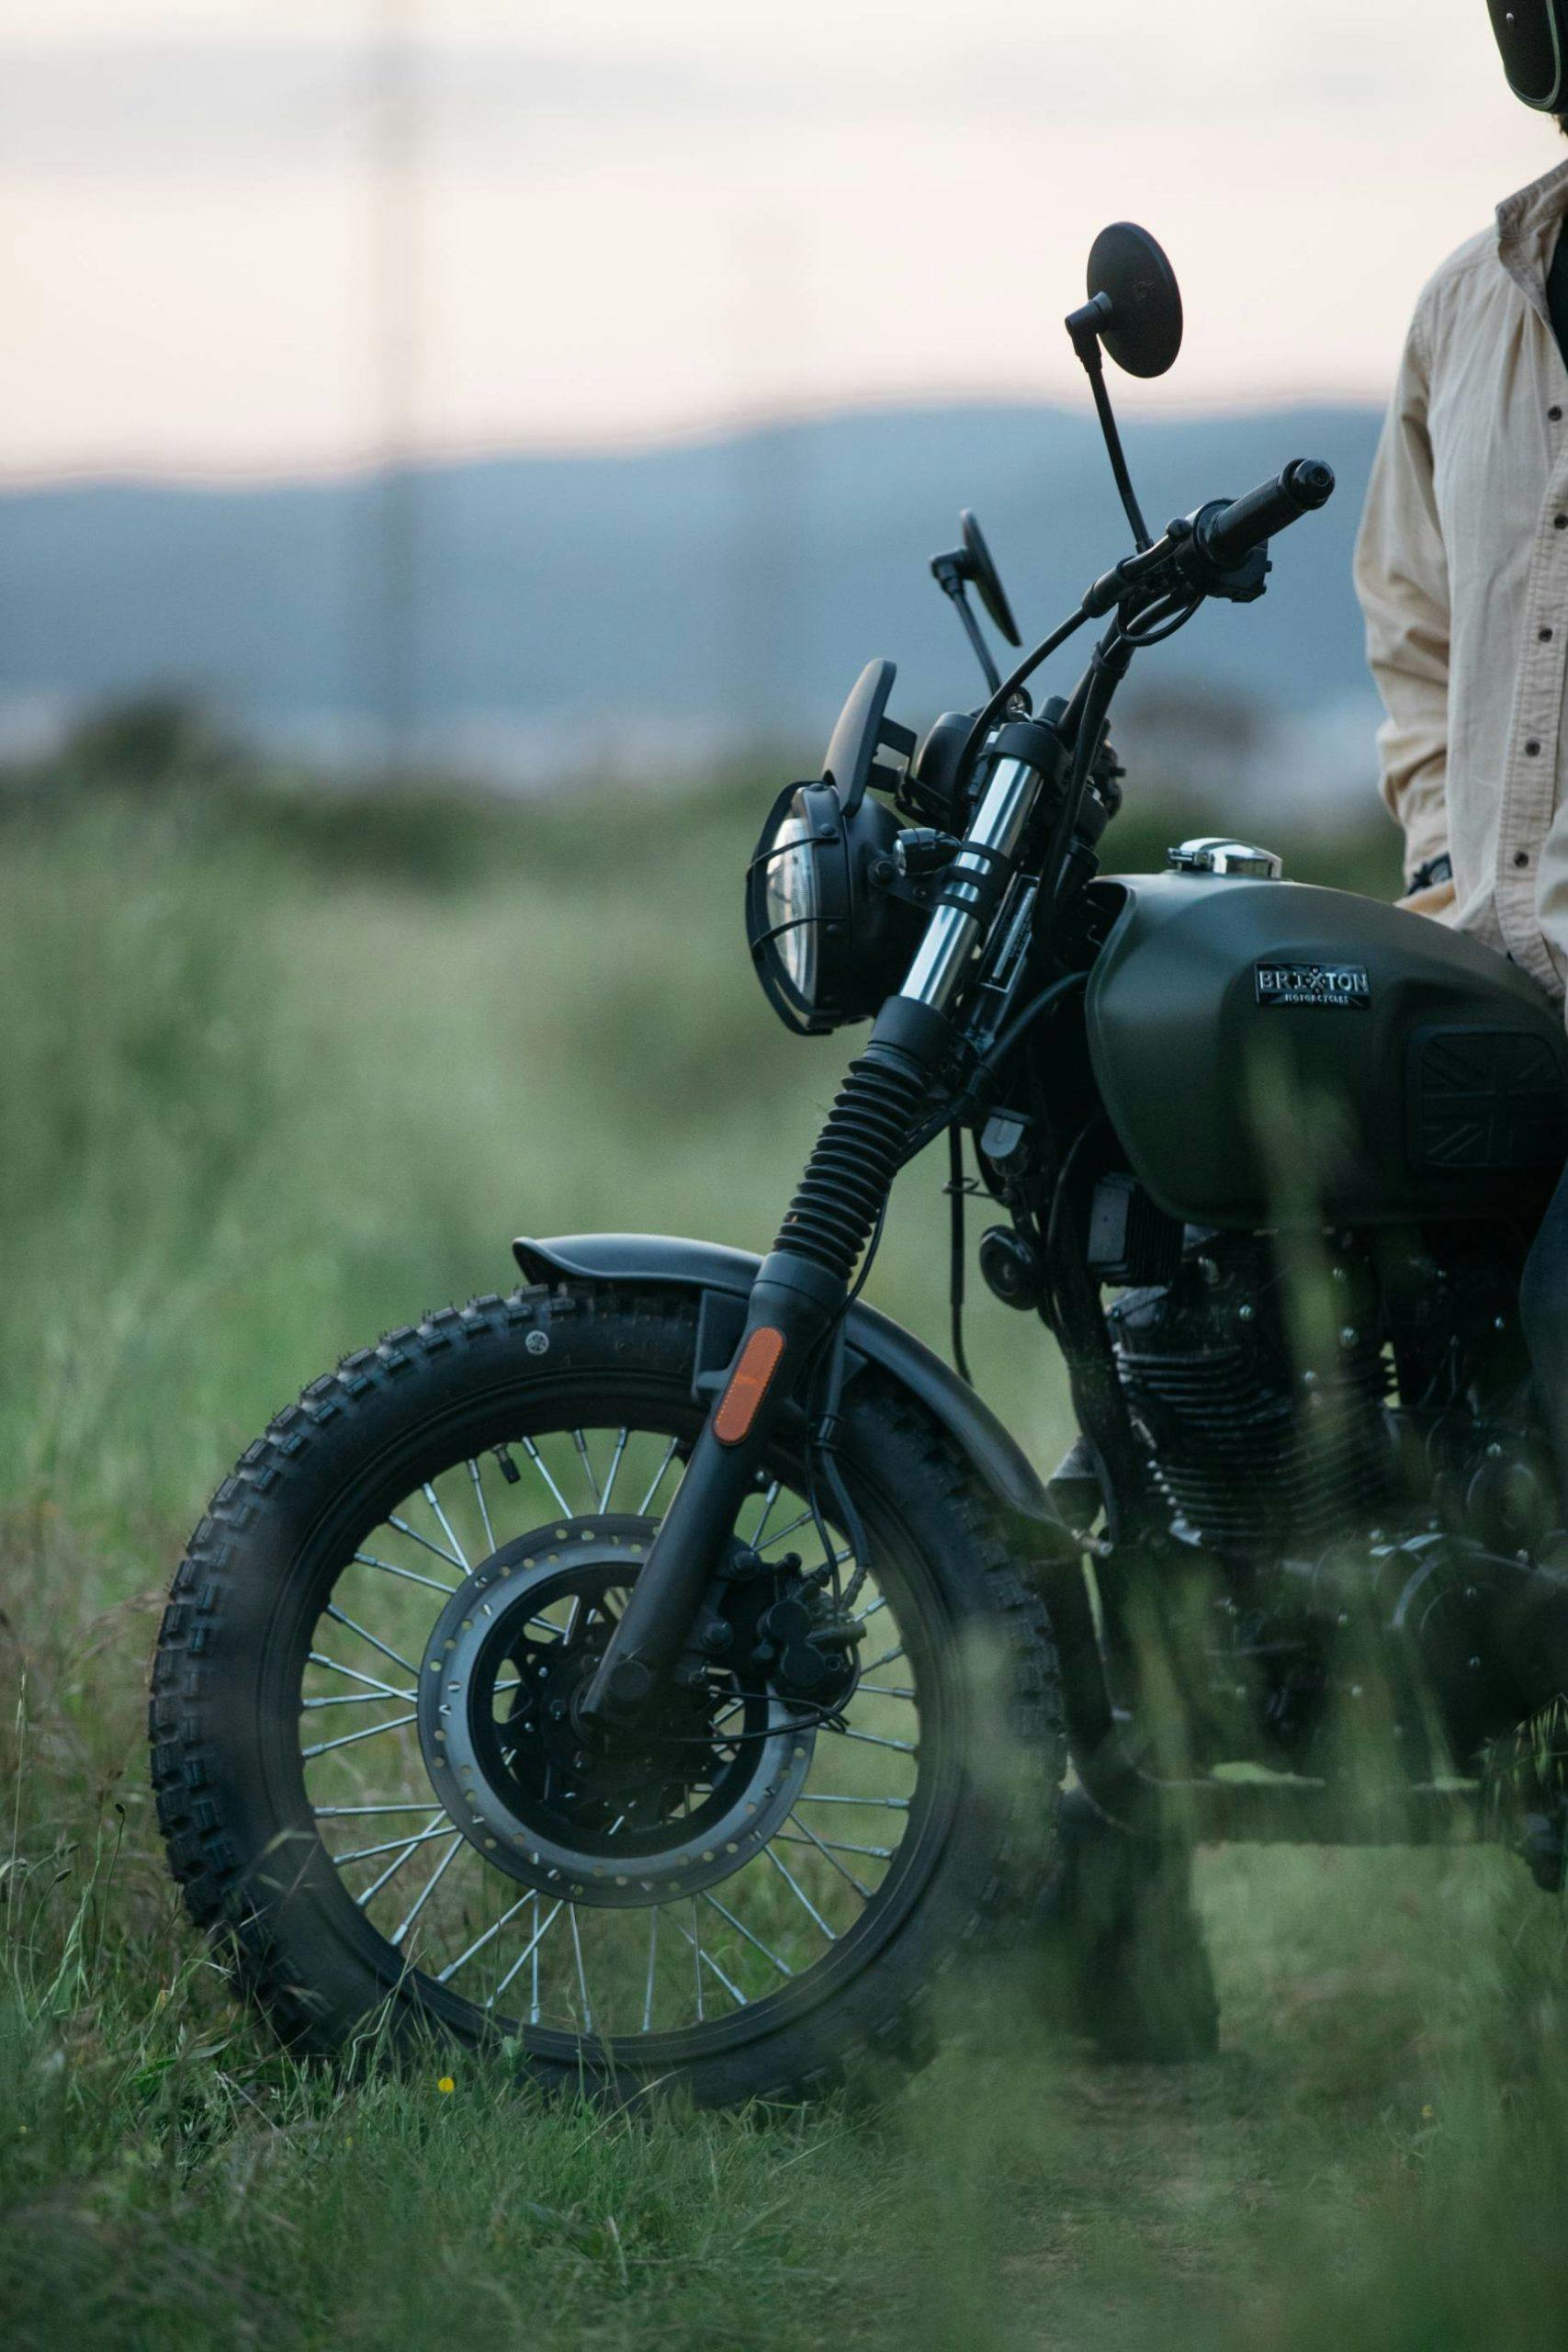 Cropped close-up of the Brixton Felsberg 125 in Cargo Green parked in a field